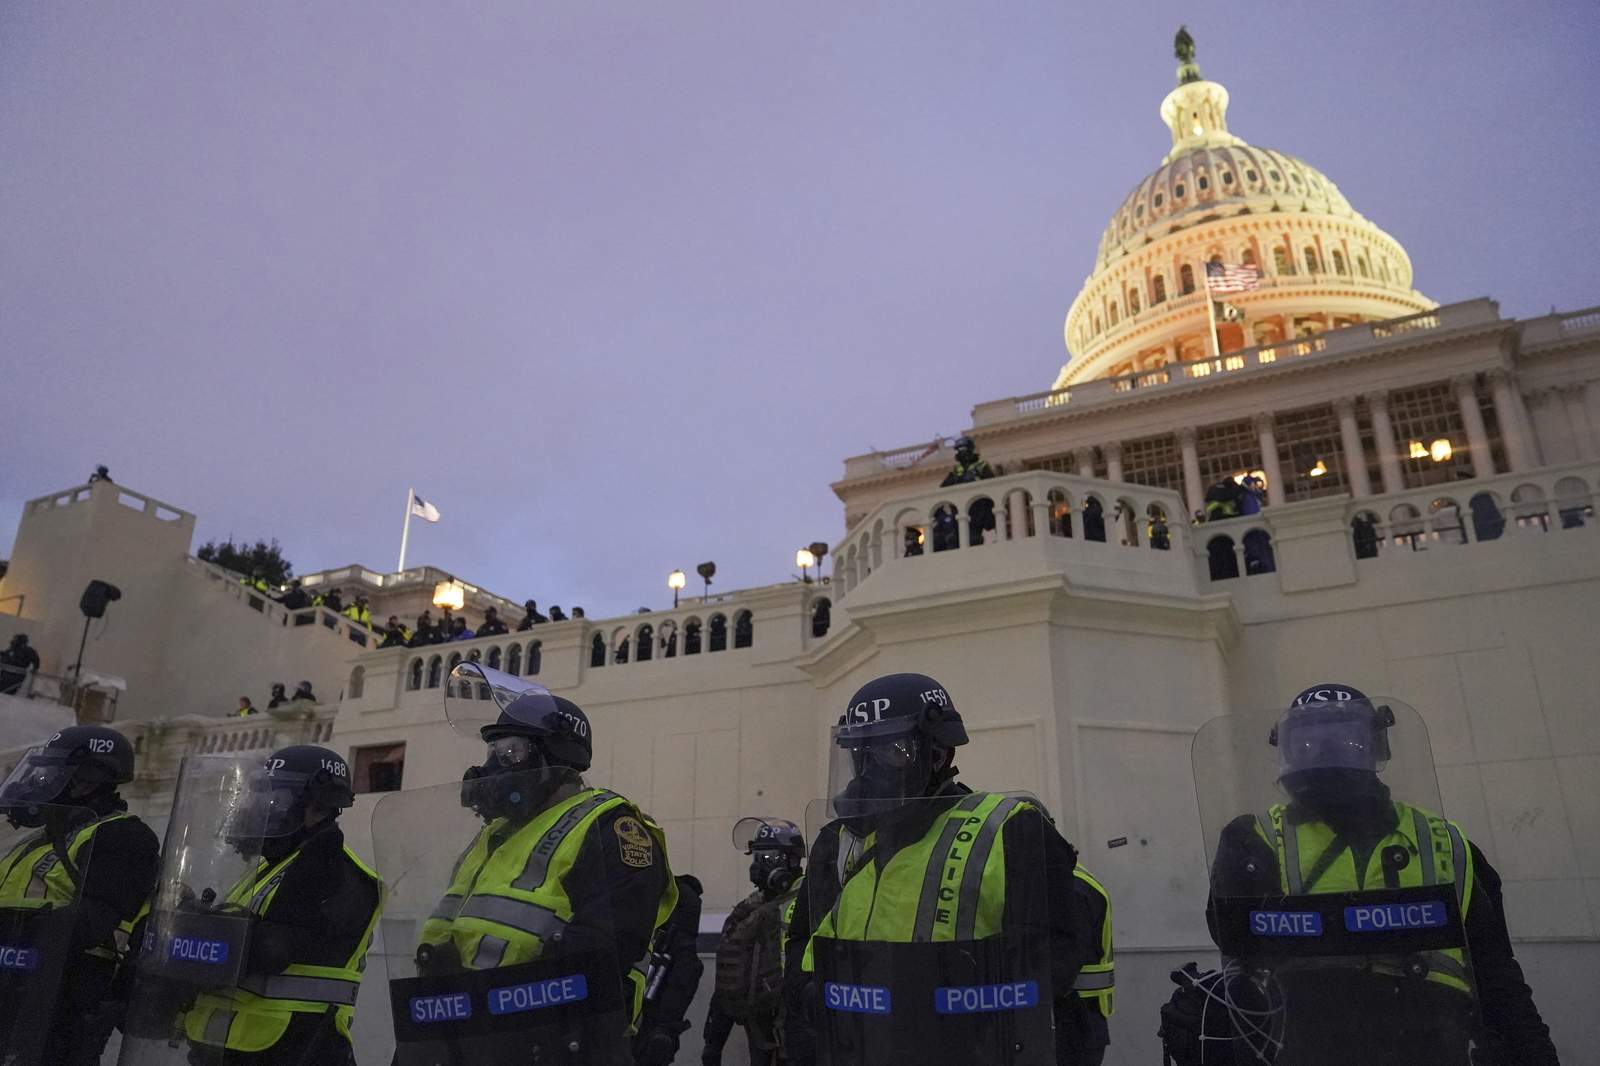 Capitol Police watchdog says force needs 'cultural change'